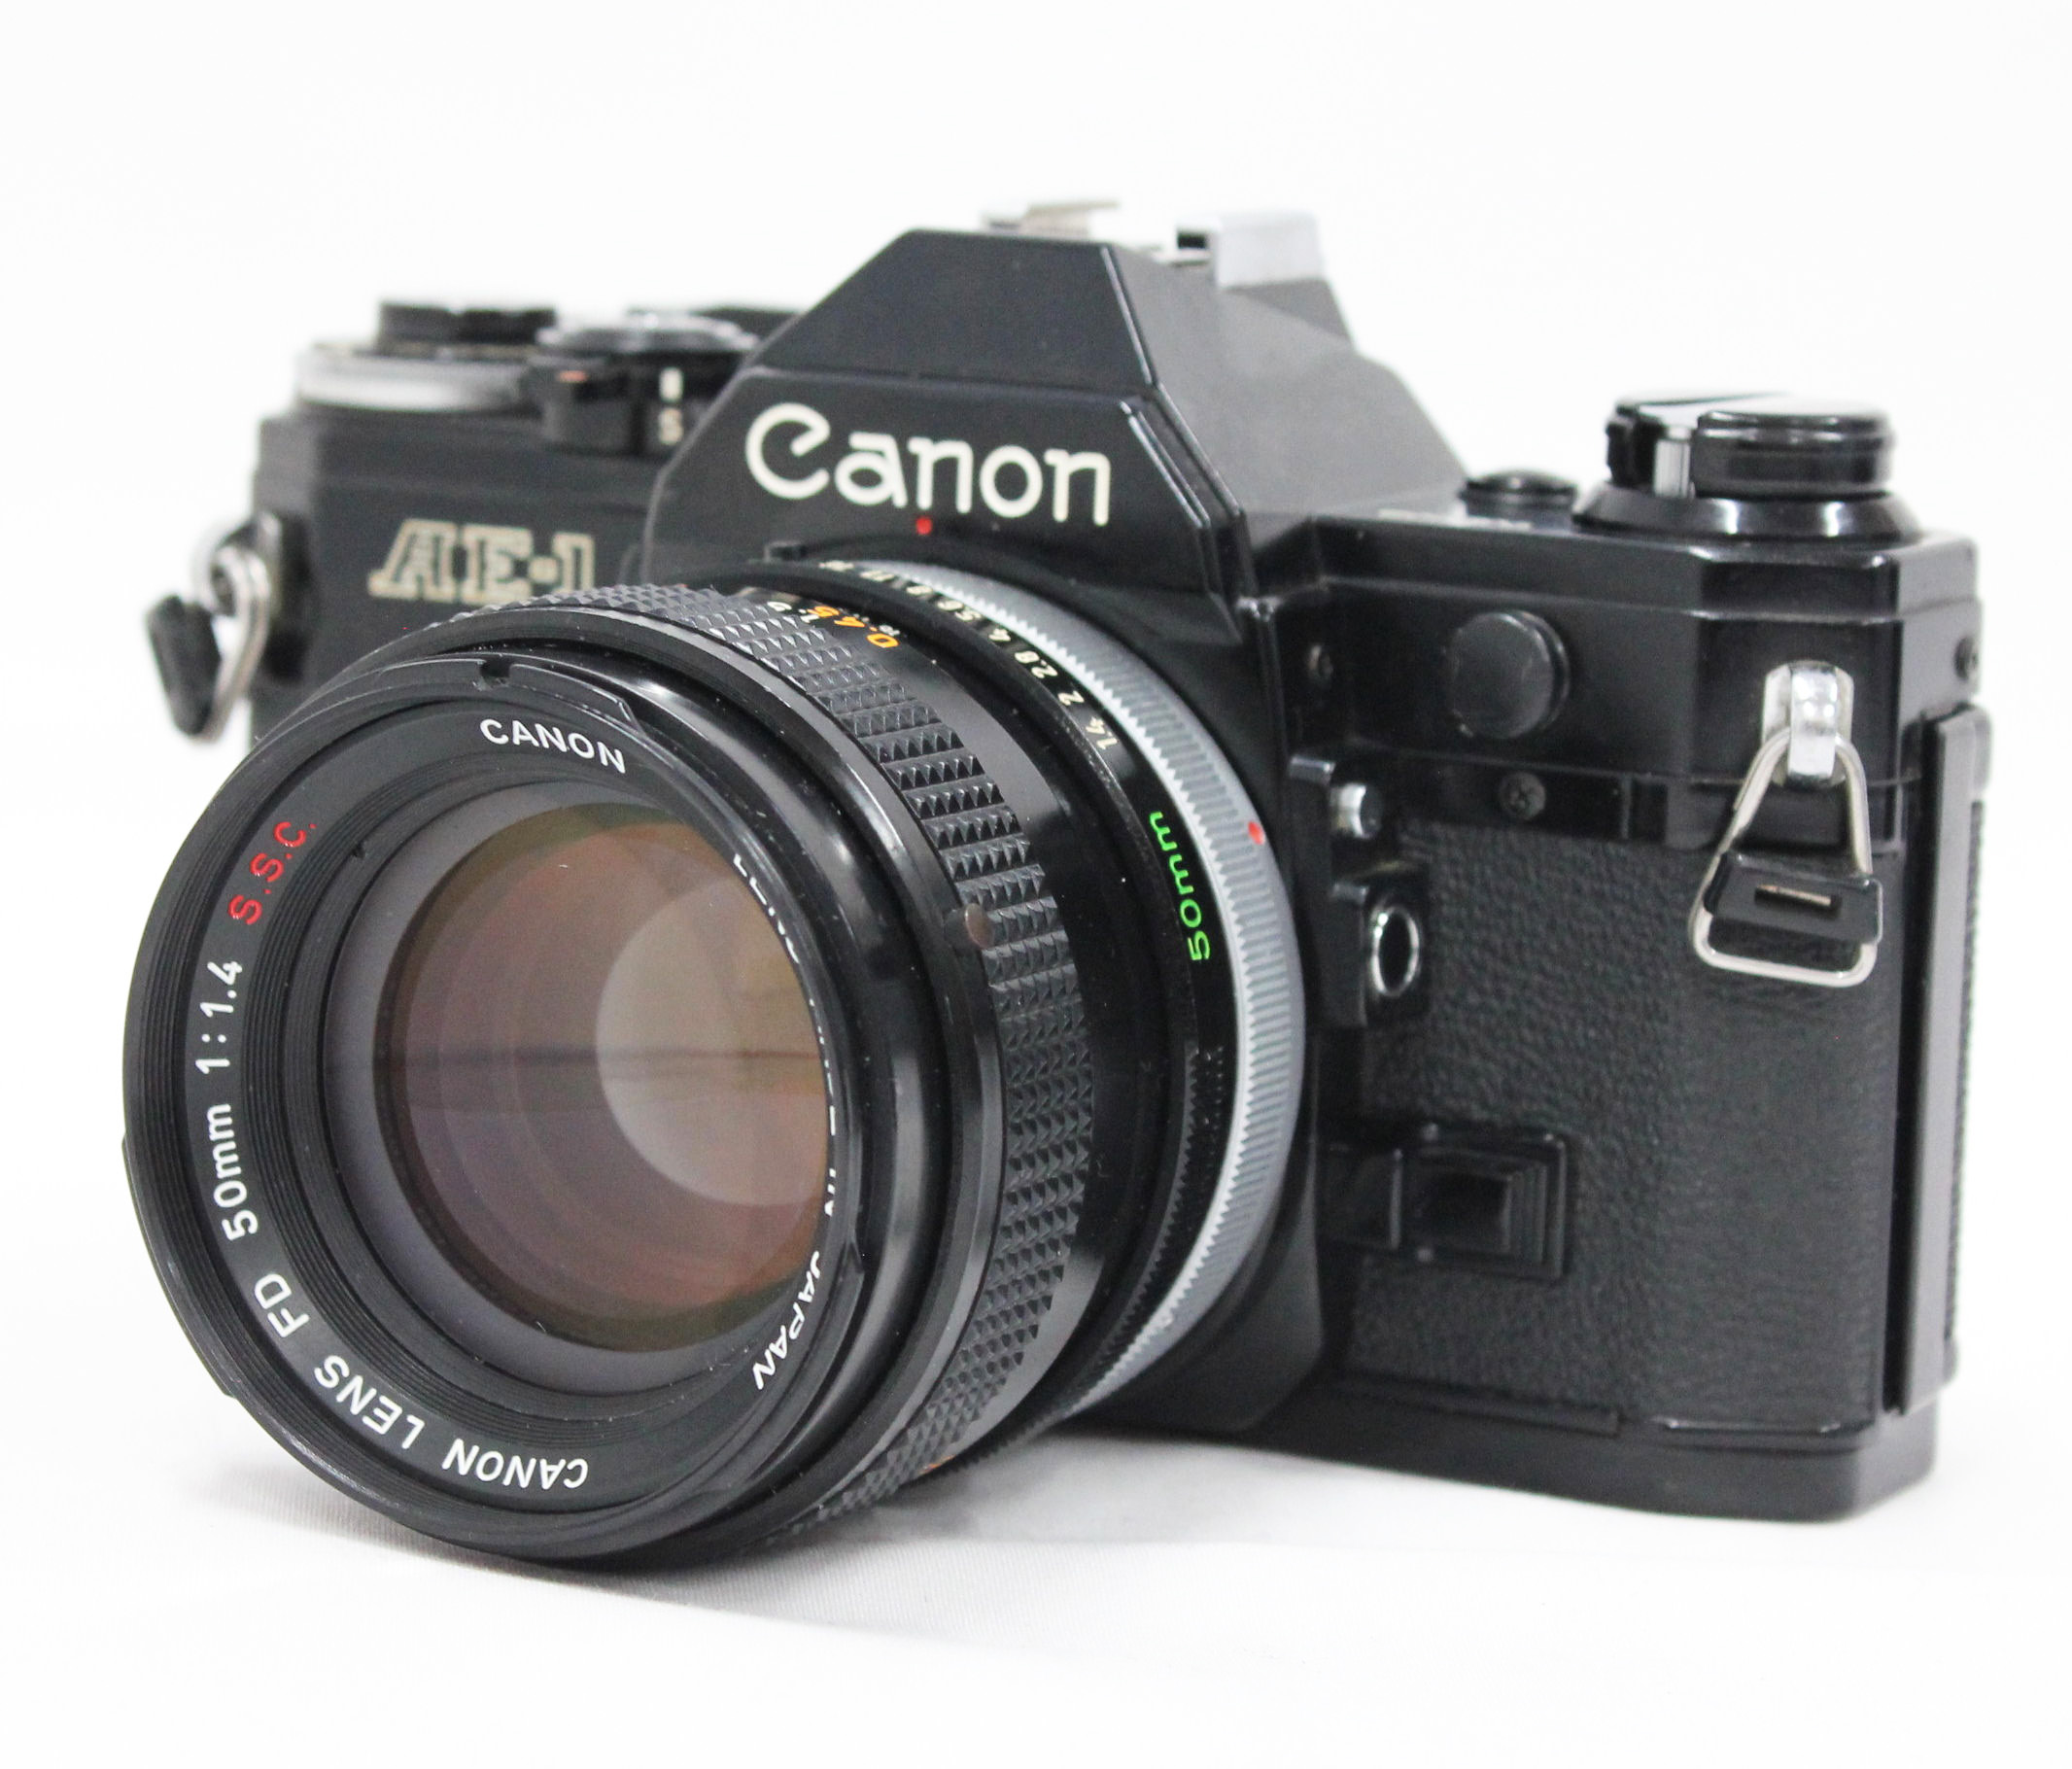 Japan Used Camera Shop | Canon AE-1 35mm SLR Film Camera Black from Japan [For Parts]